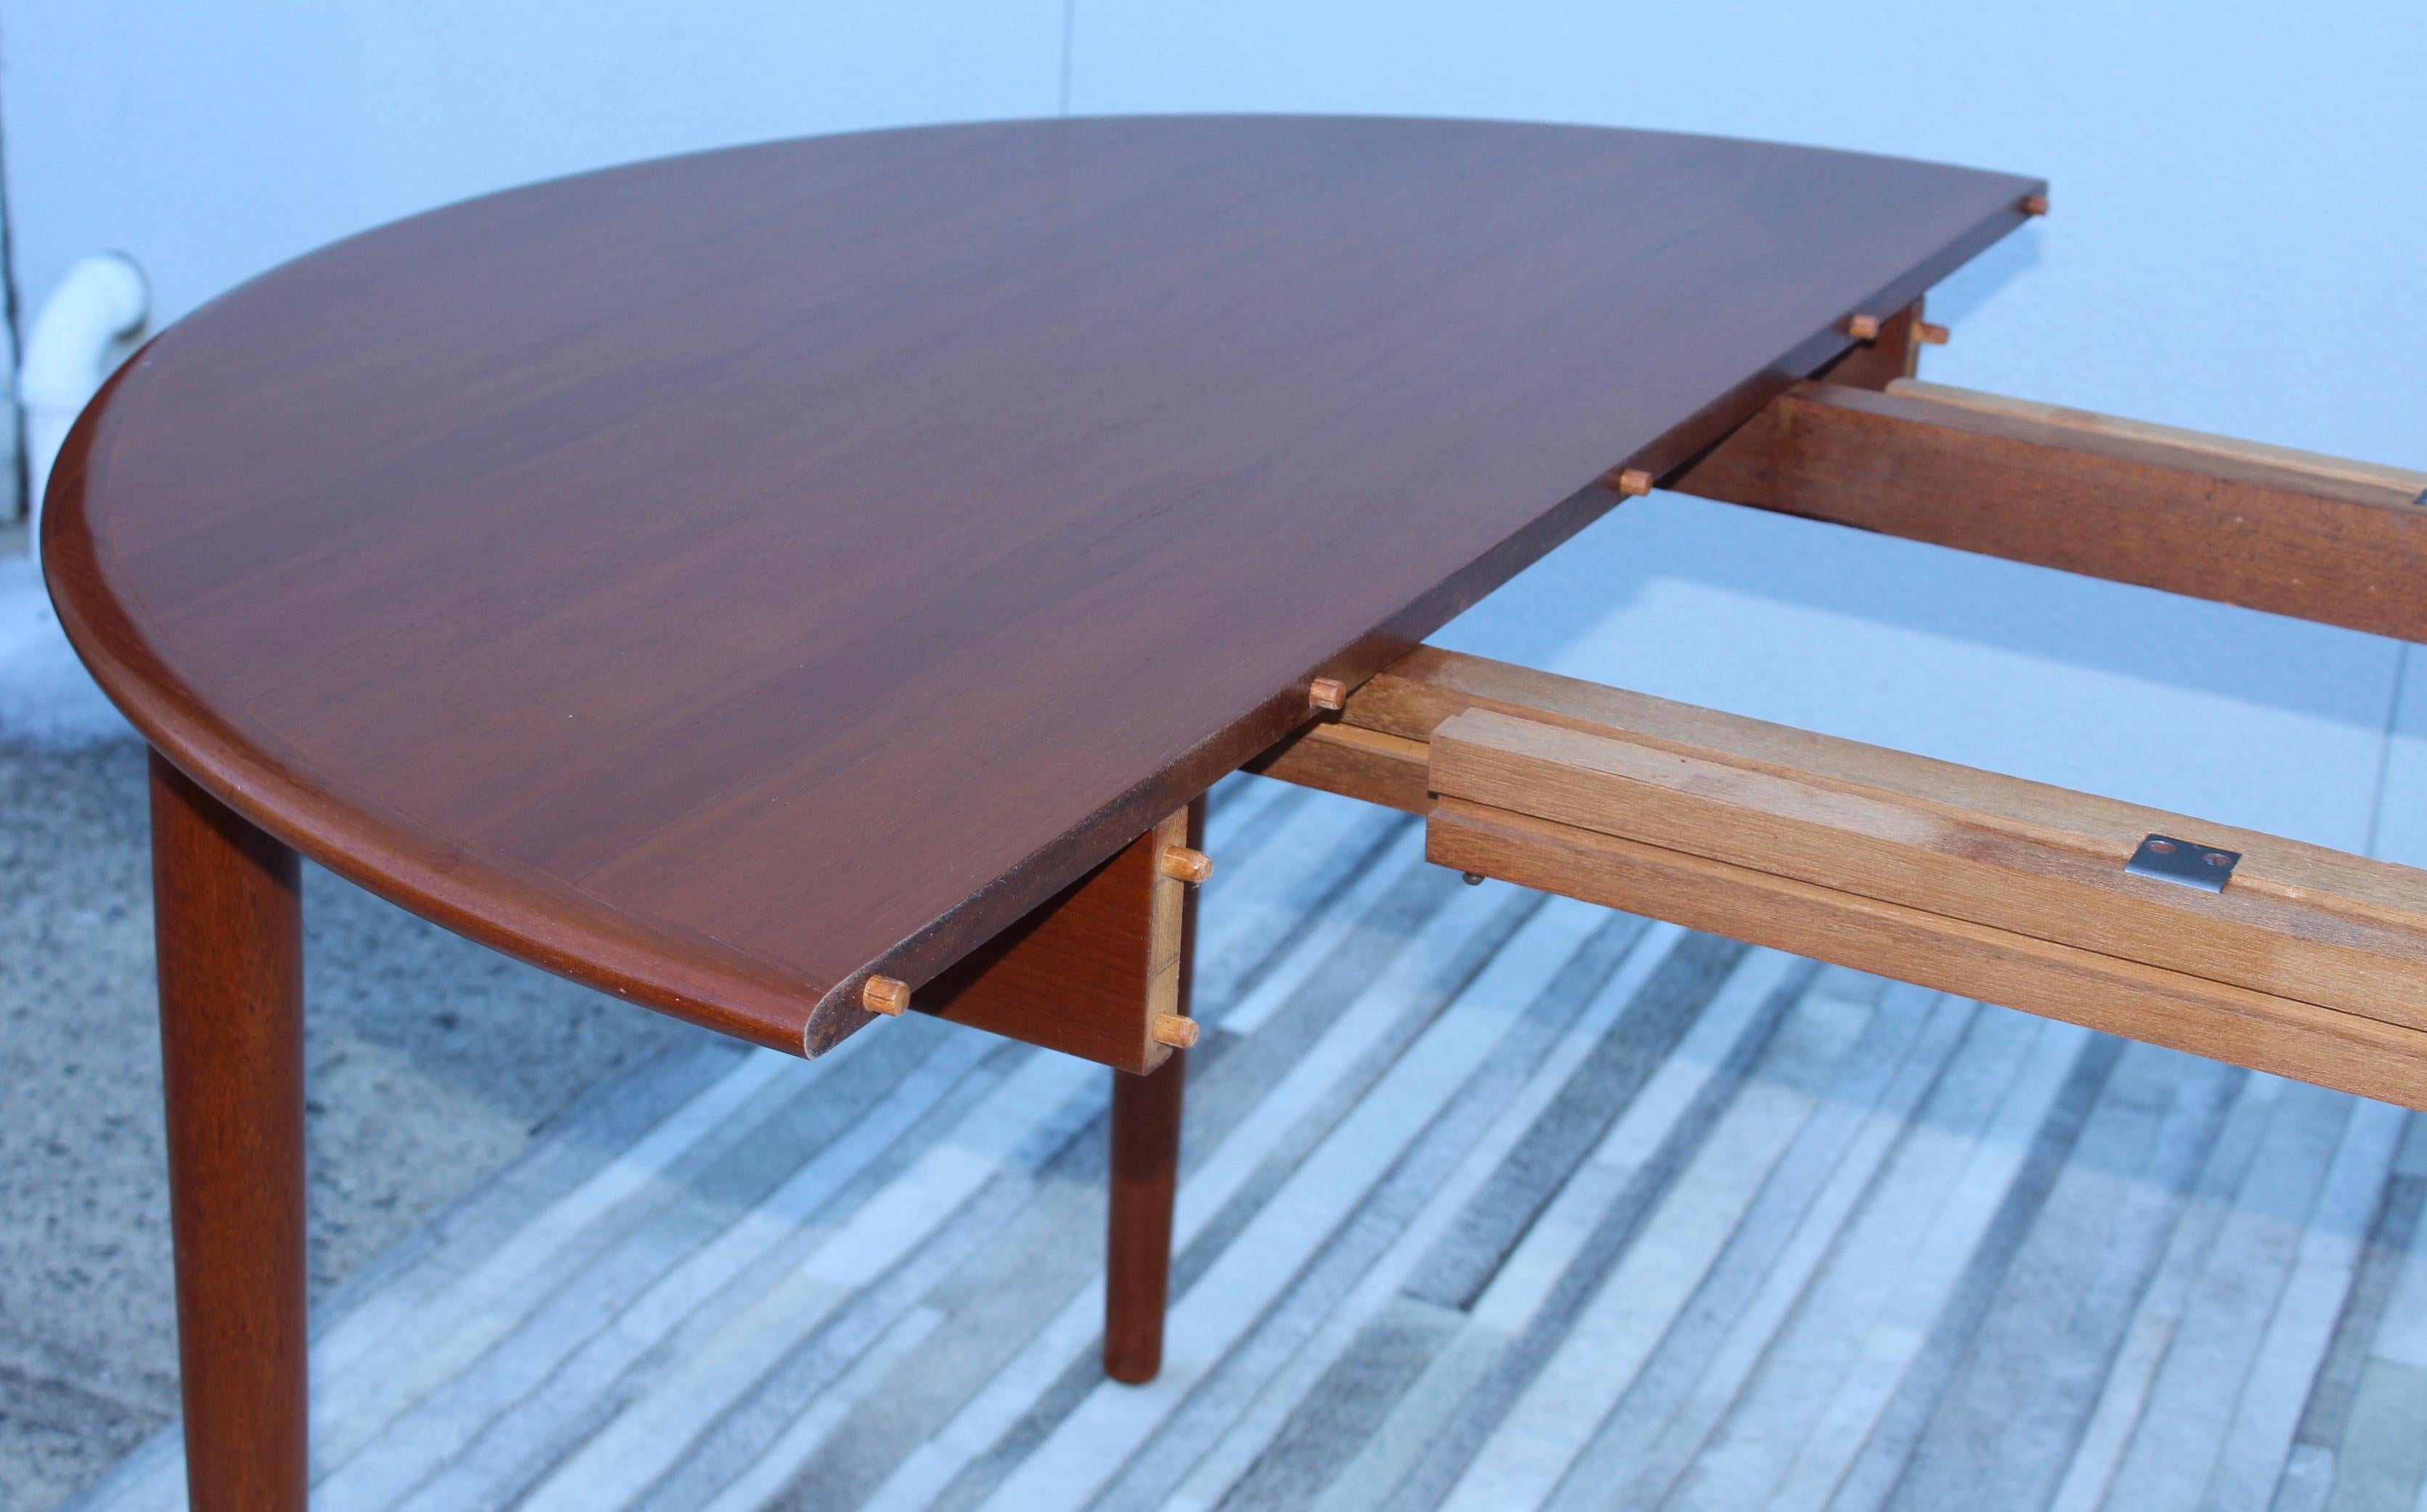 1960's Mid-Century Modern Danish Teak Round Dining Table with Two Leaves 3